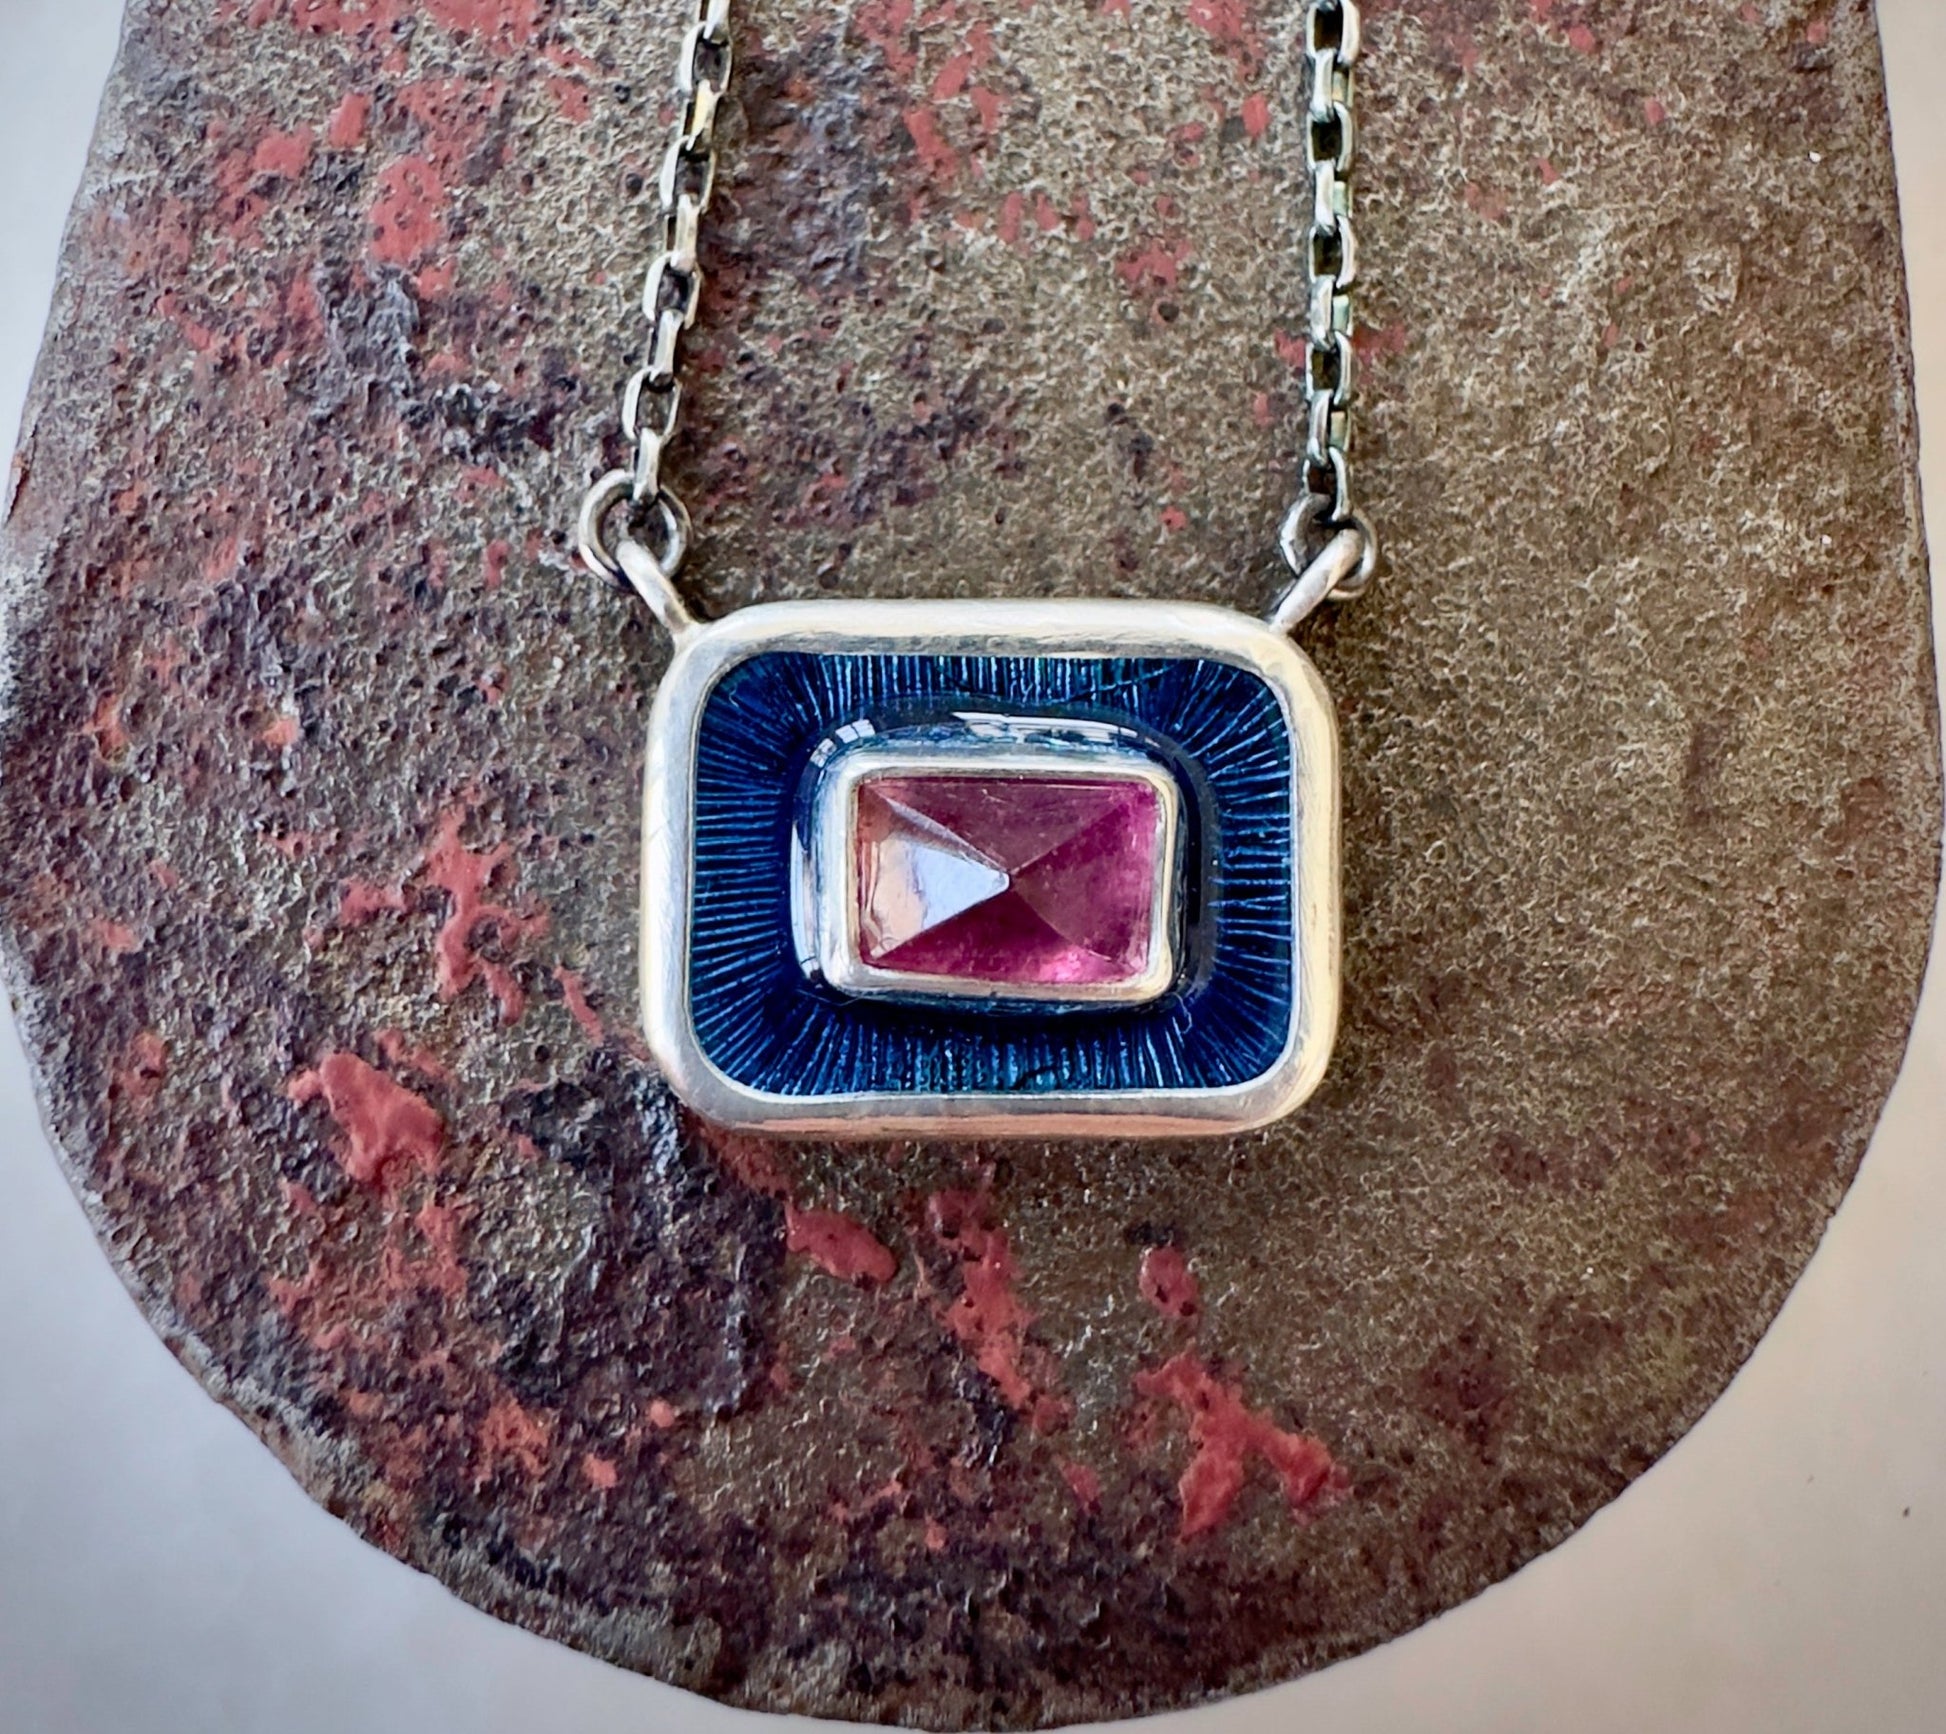 Pink Tourmaline Pyramid in Blue Enamel Chiclet Necklace - Bluecave Jewelry